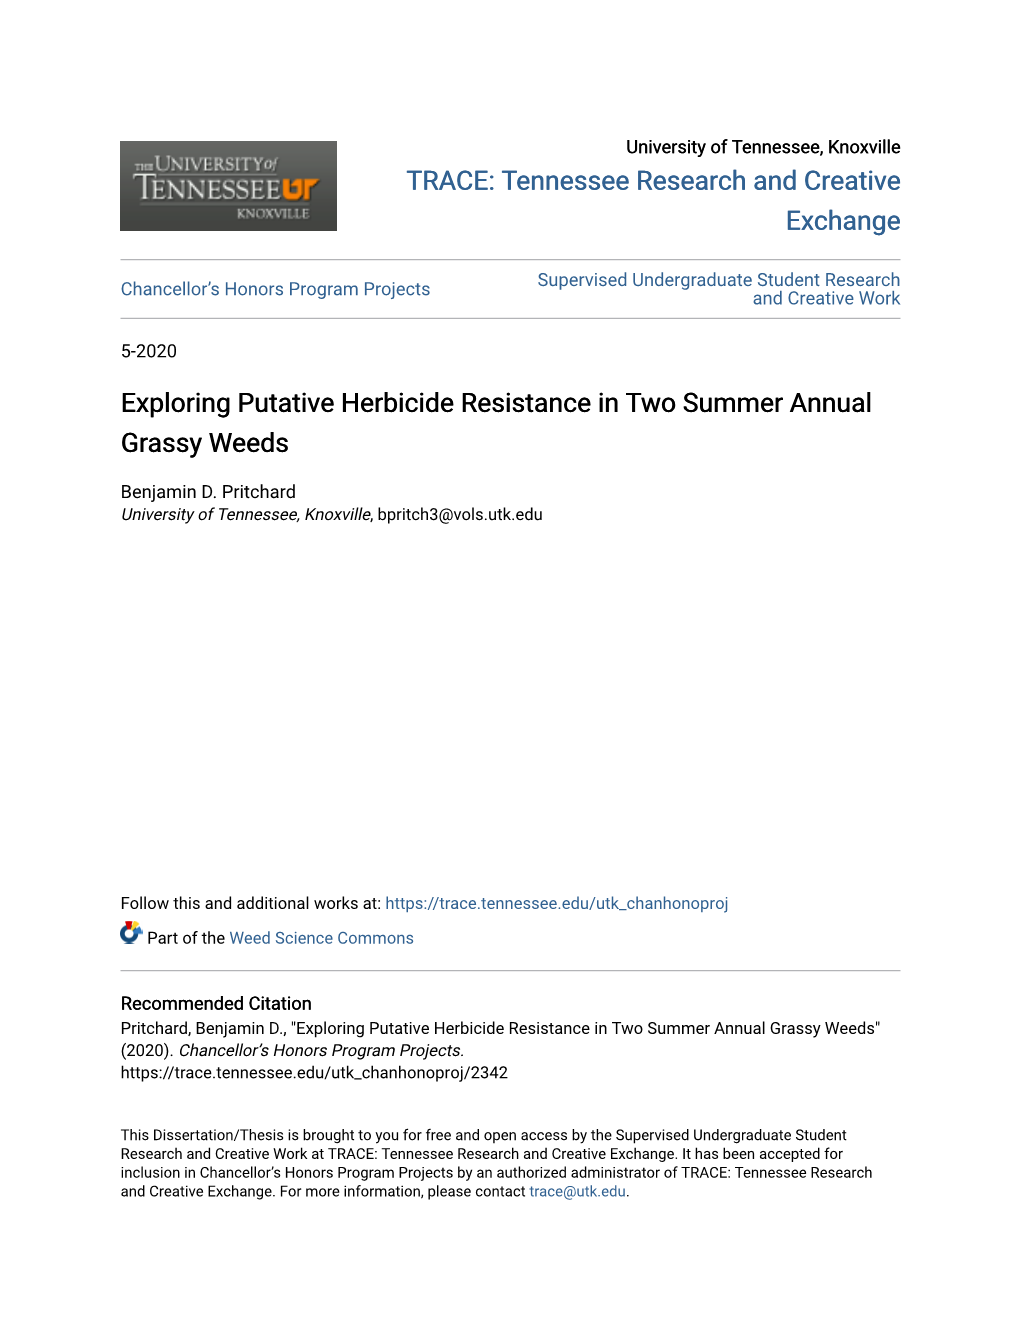 Exploring Putative Herbicide Resistance in Two Summer Annual Grassy Weeds